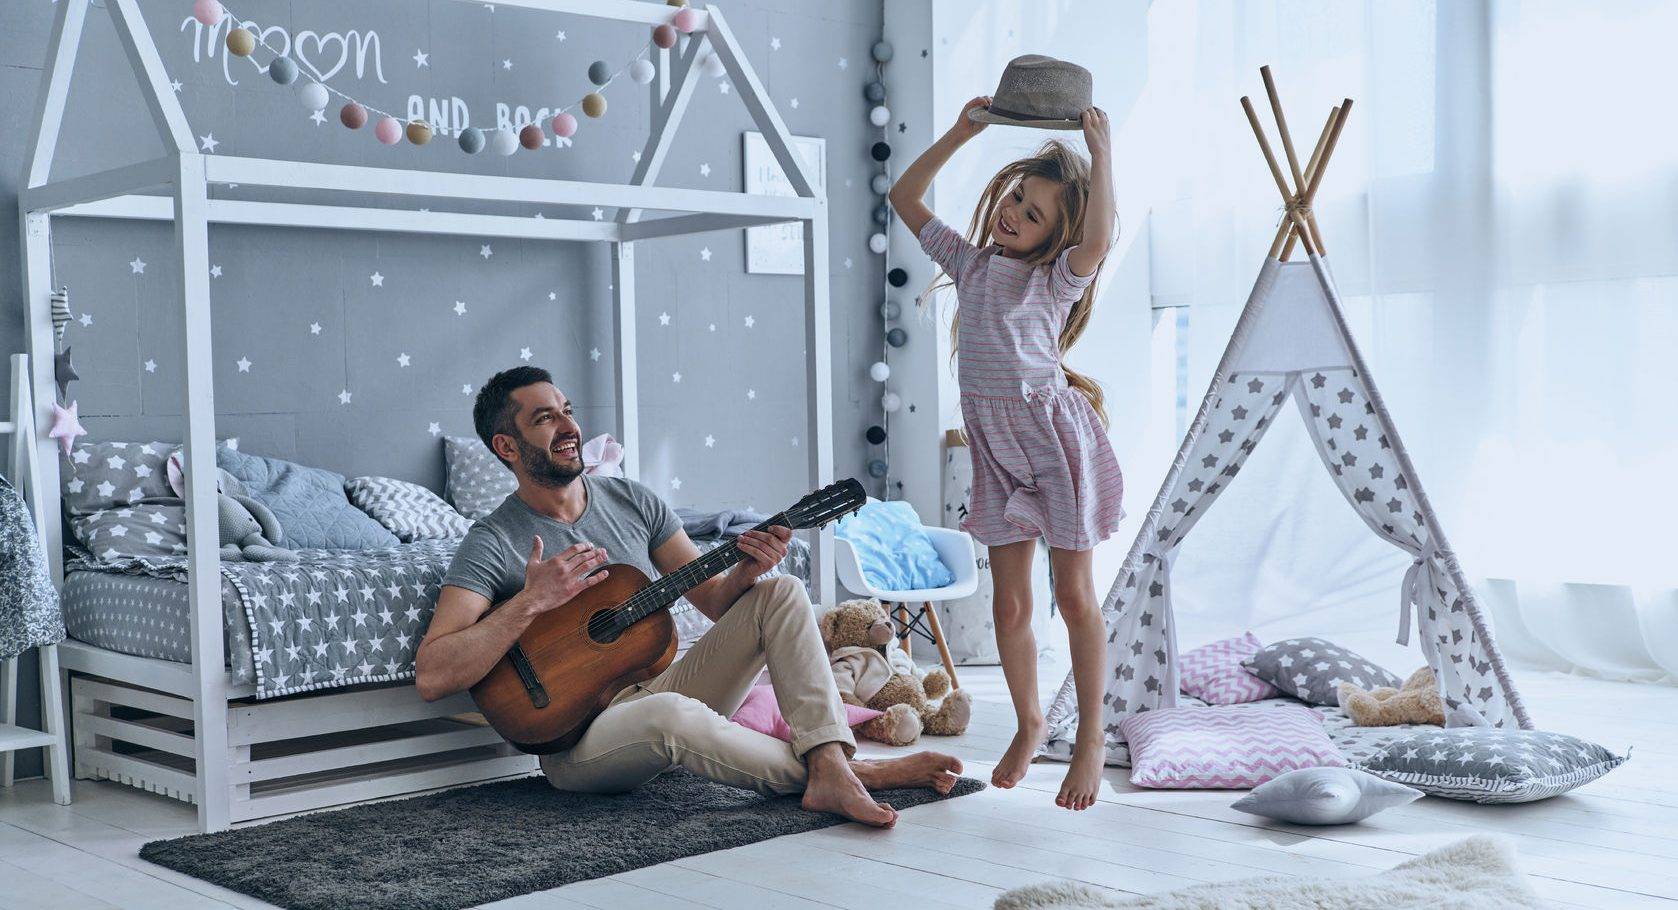 Young father plays guitar for his little daughter while she is jumping in bedroom, displaying her unique identity.